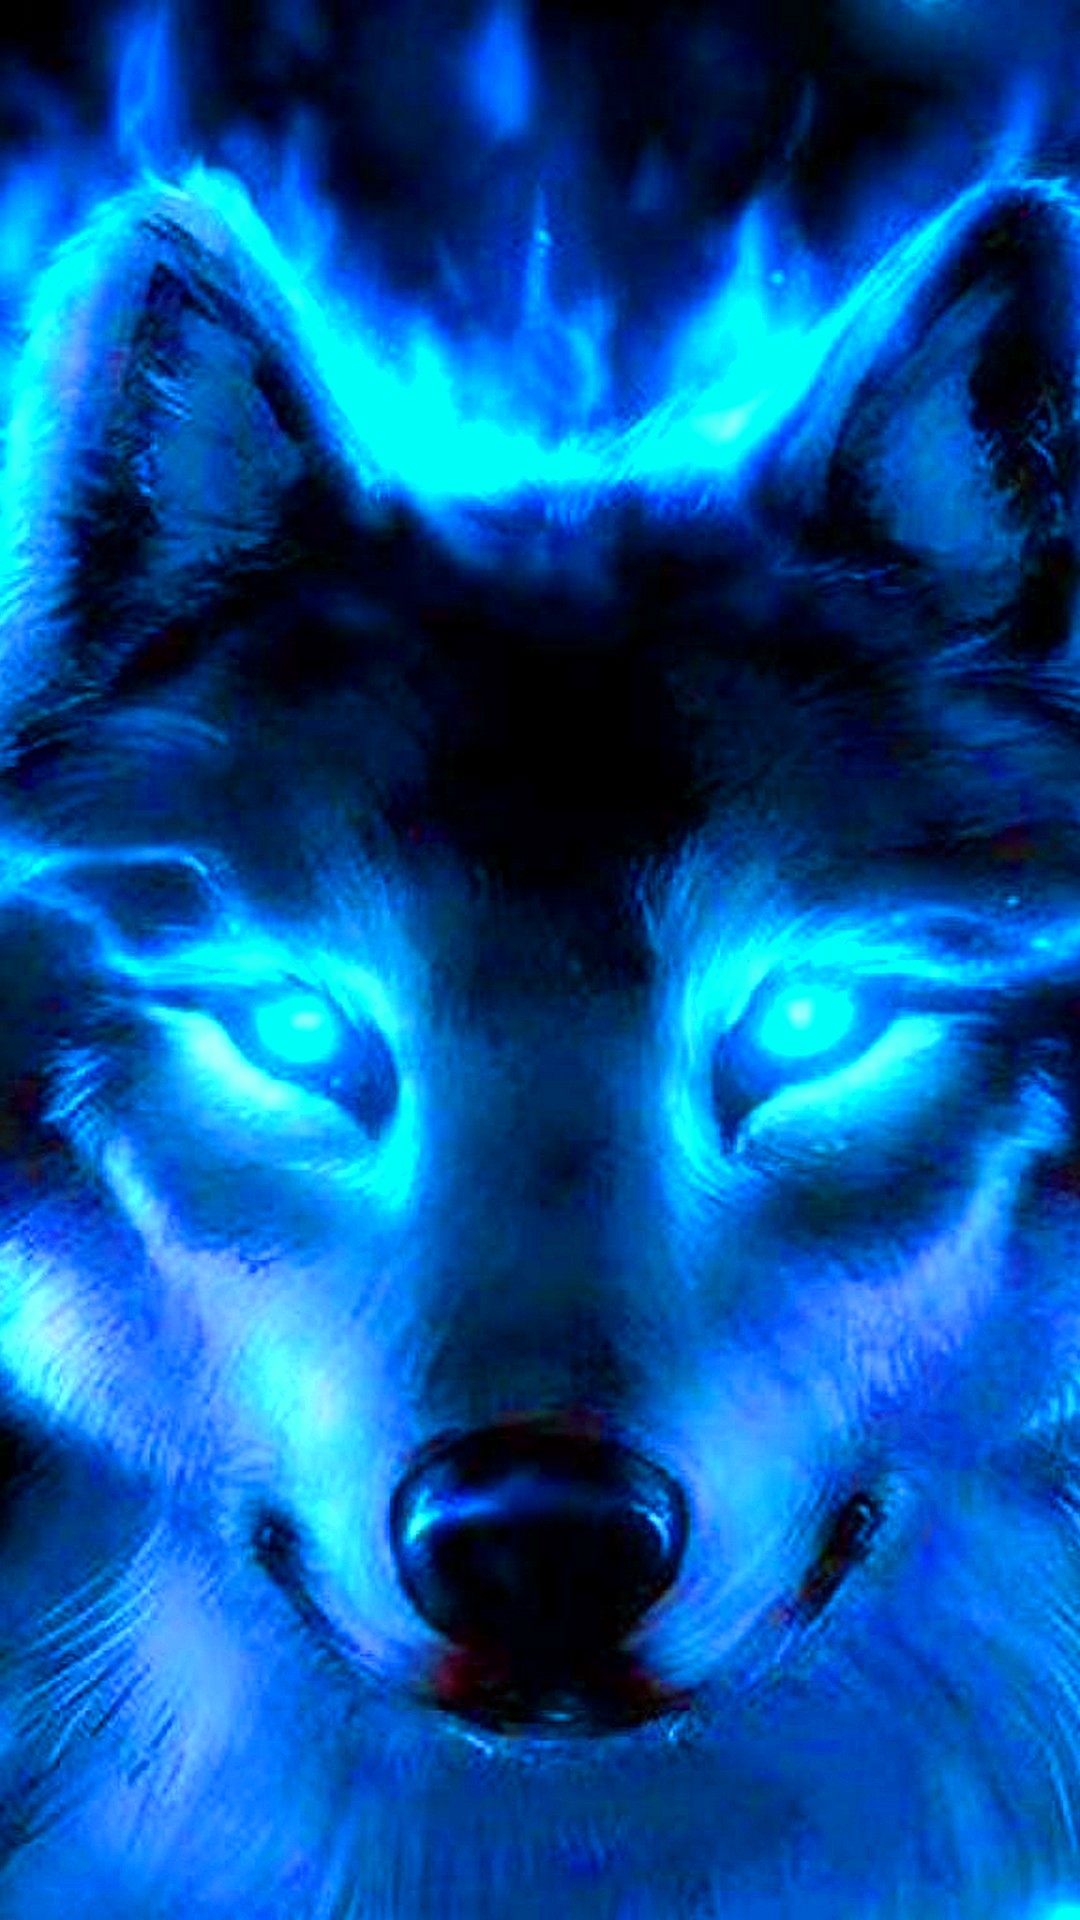 Cool Wolf iPhone 8 Wallpaper With high-resolution 1080X1920 pixel. You can use this wallpaper for your iPhone 5, 6, 7, 8, X, XS, XR backgrounds, Mobile Screensaver, or iPad Lock Screen